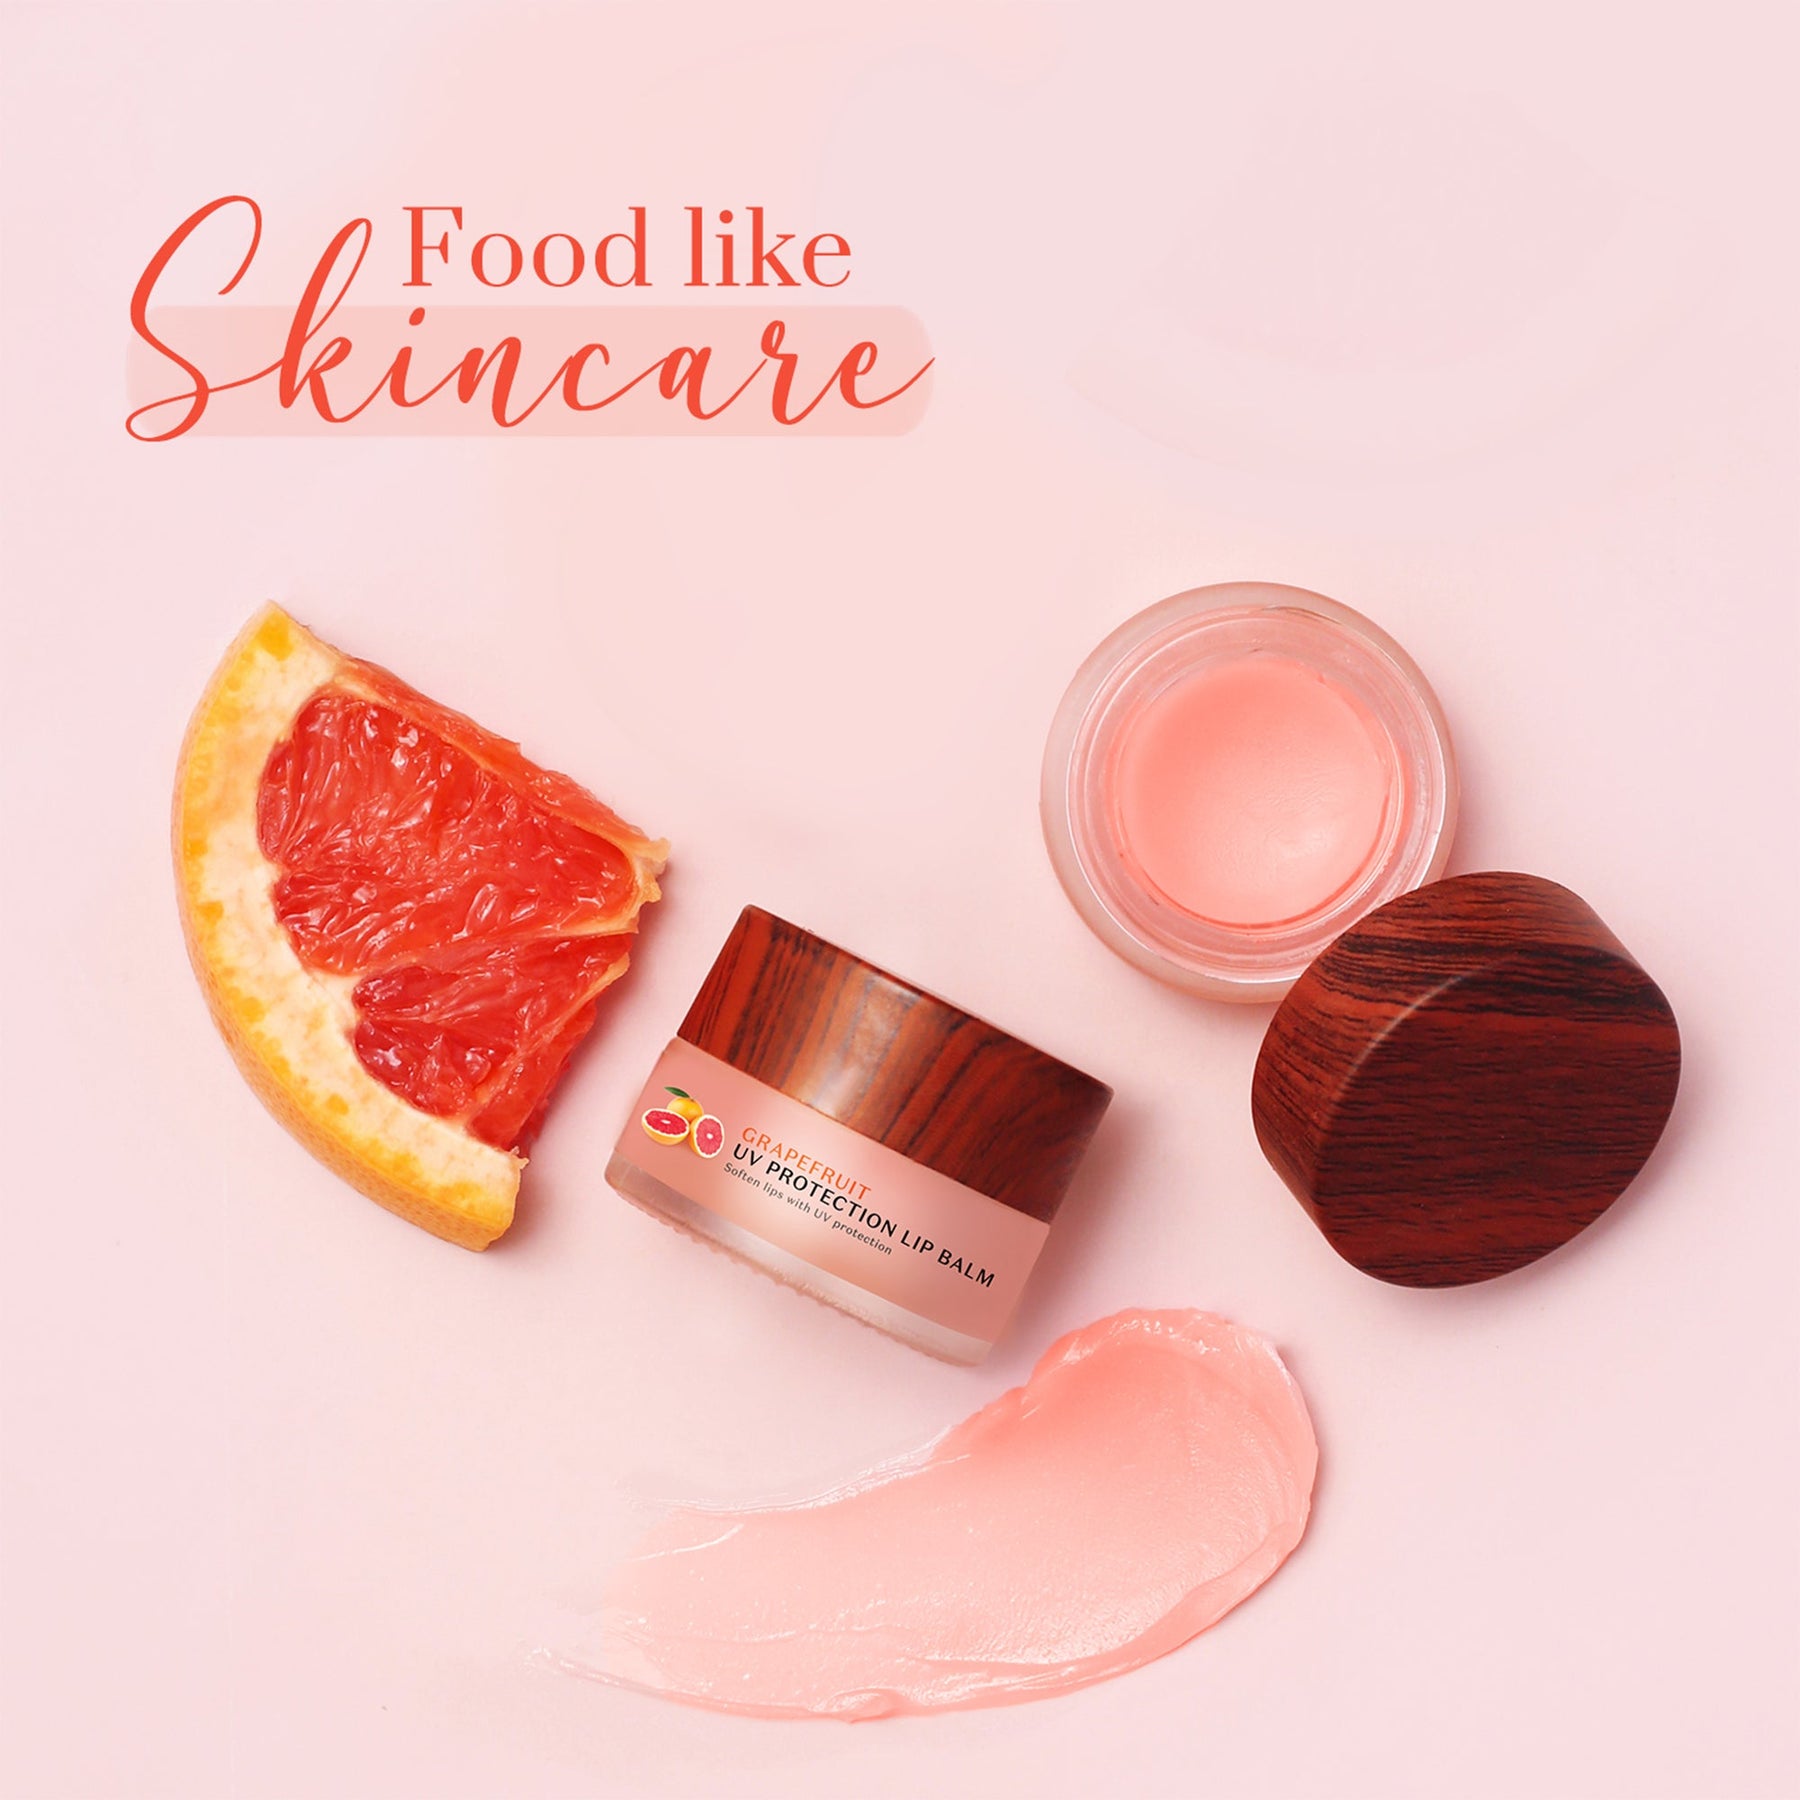 [CRED] Grapefruit UV Protection Lip Balm (Pack of 2) | From the makers of Parachute Advansed | 10ml